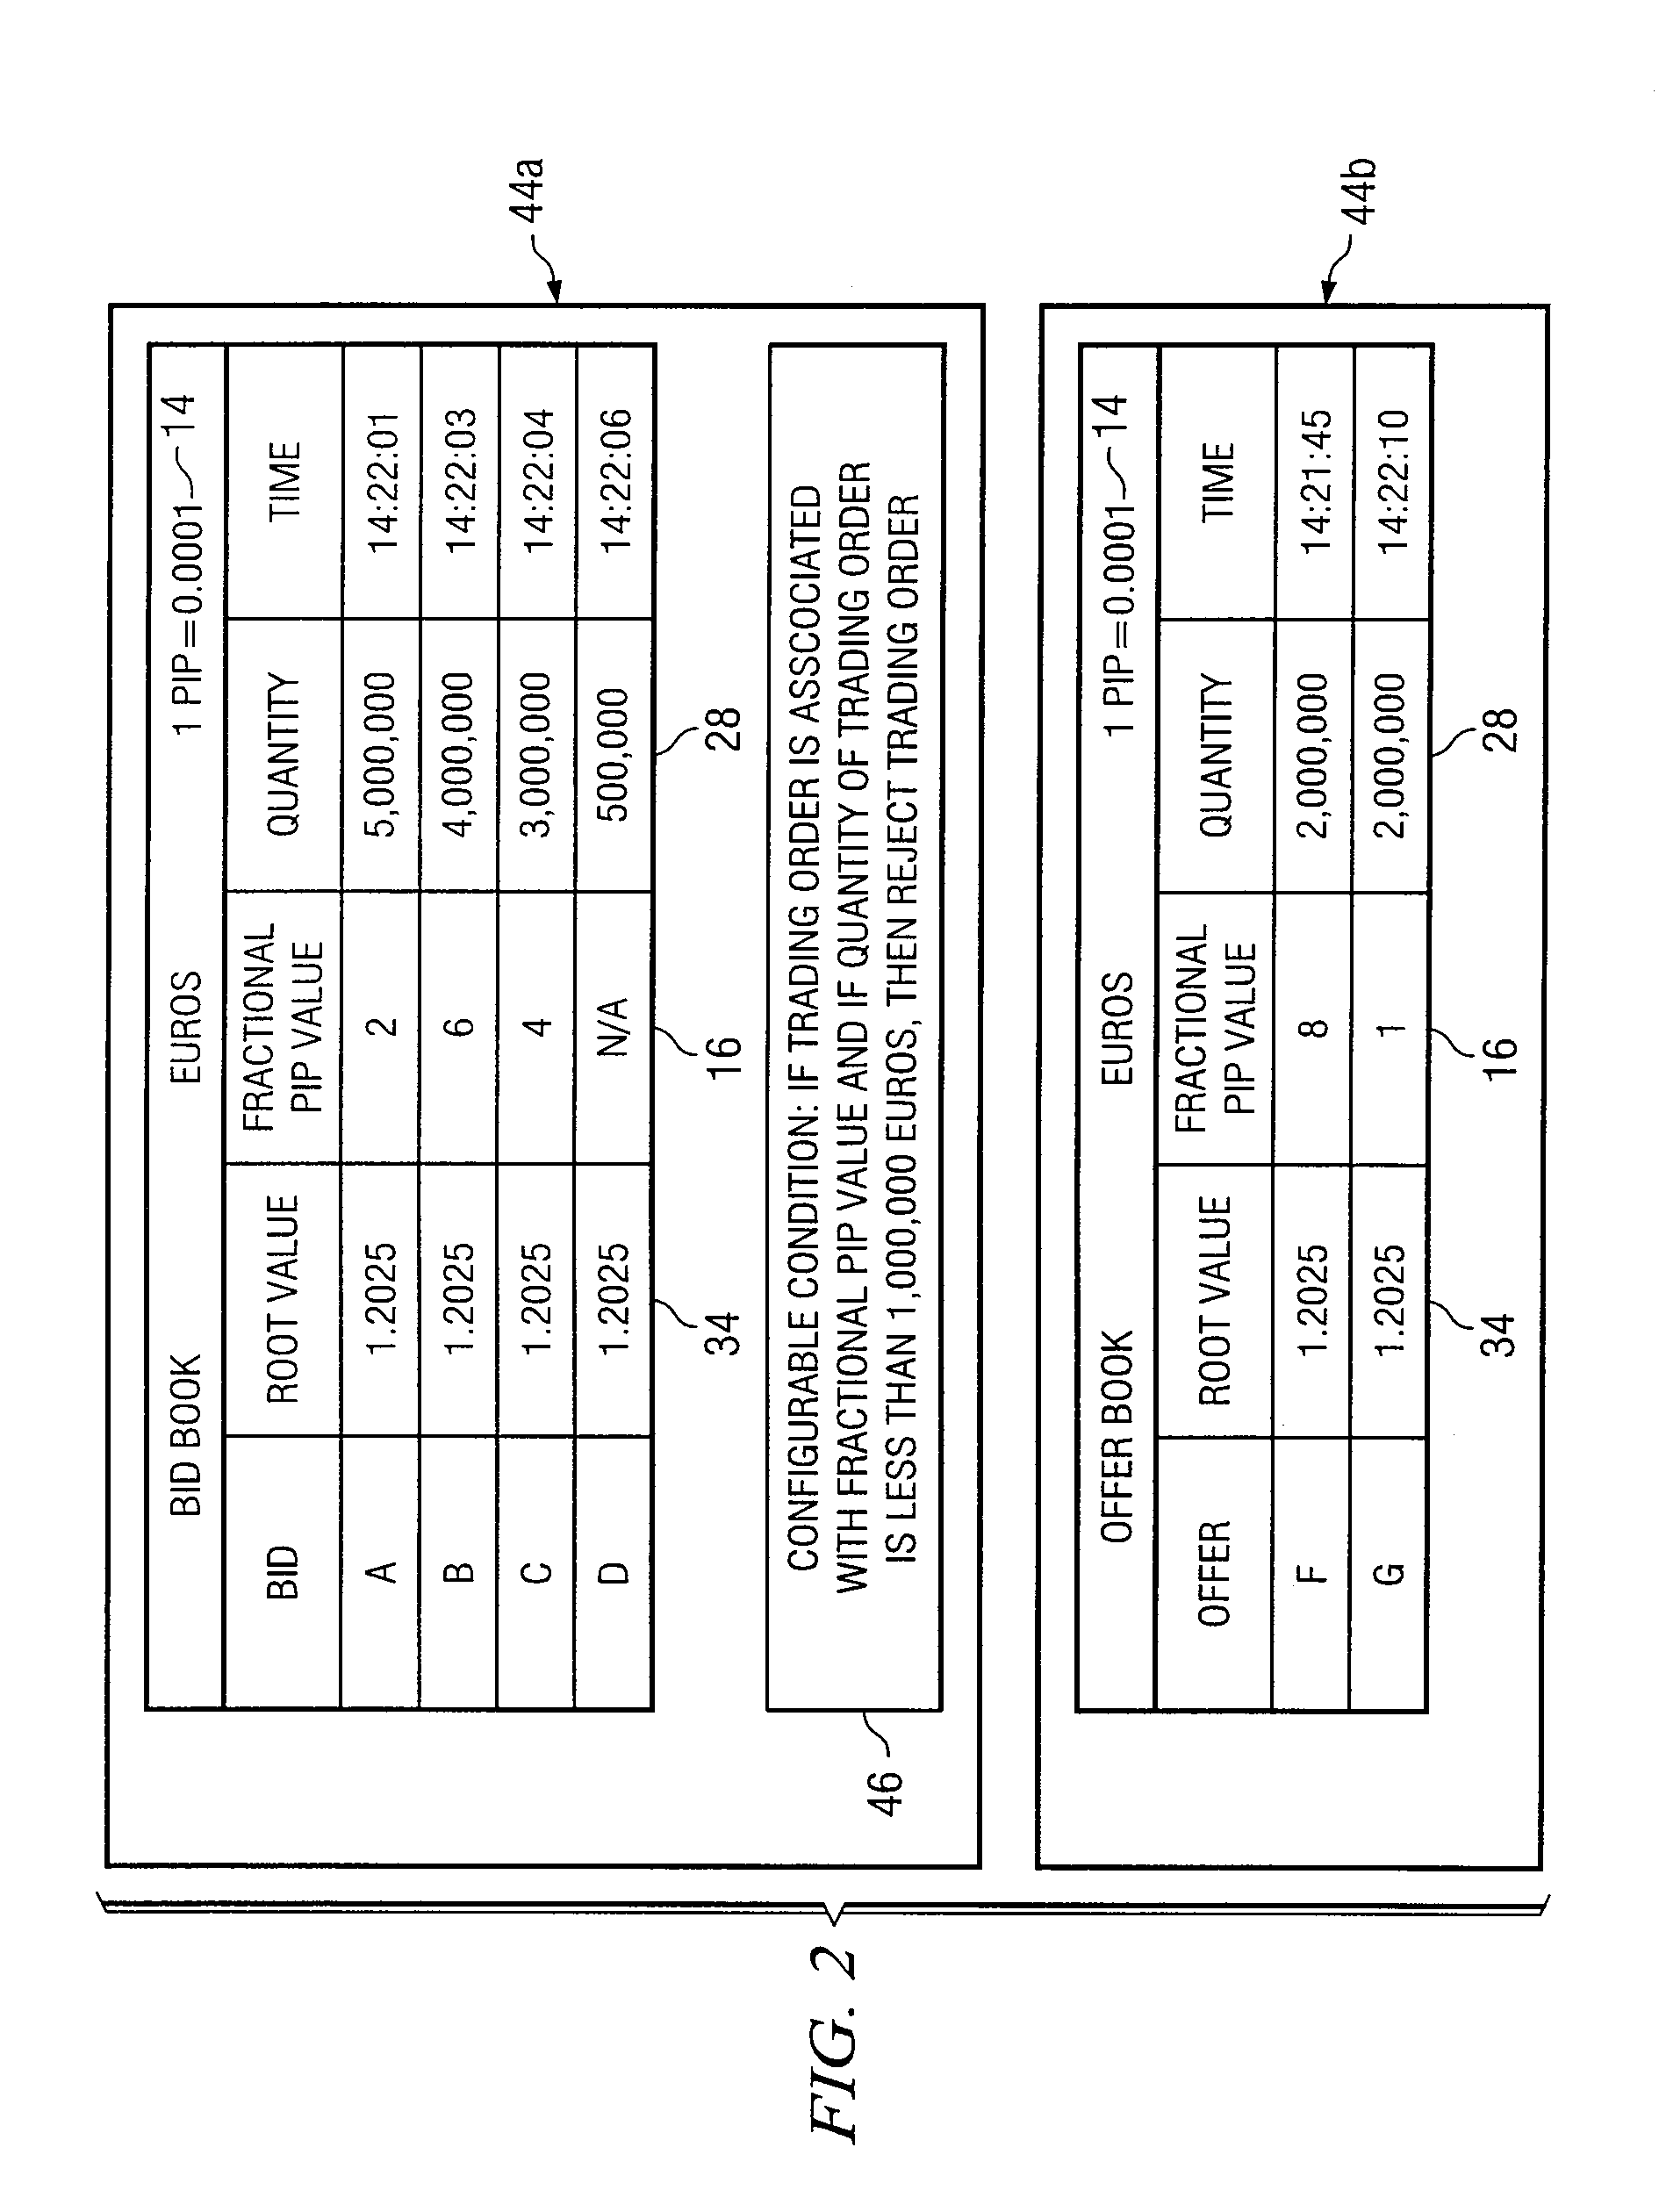 System and Method for Managing Discretion Trading Orders